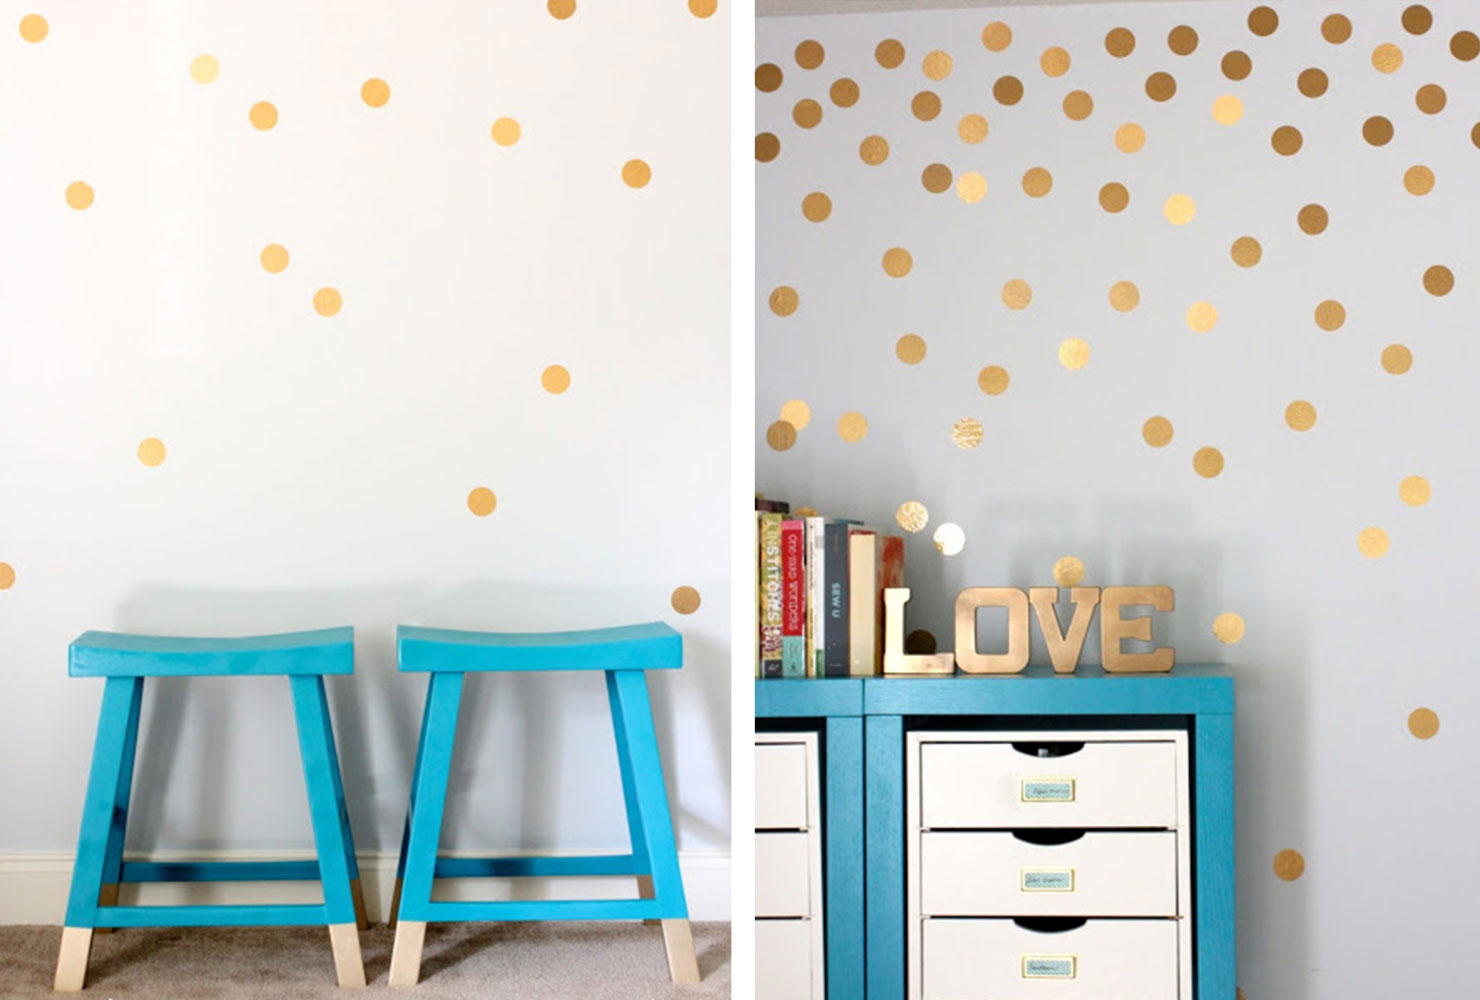 55+ DIY Room Decor Ideas to Decorate Your Home | Shutterfly